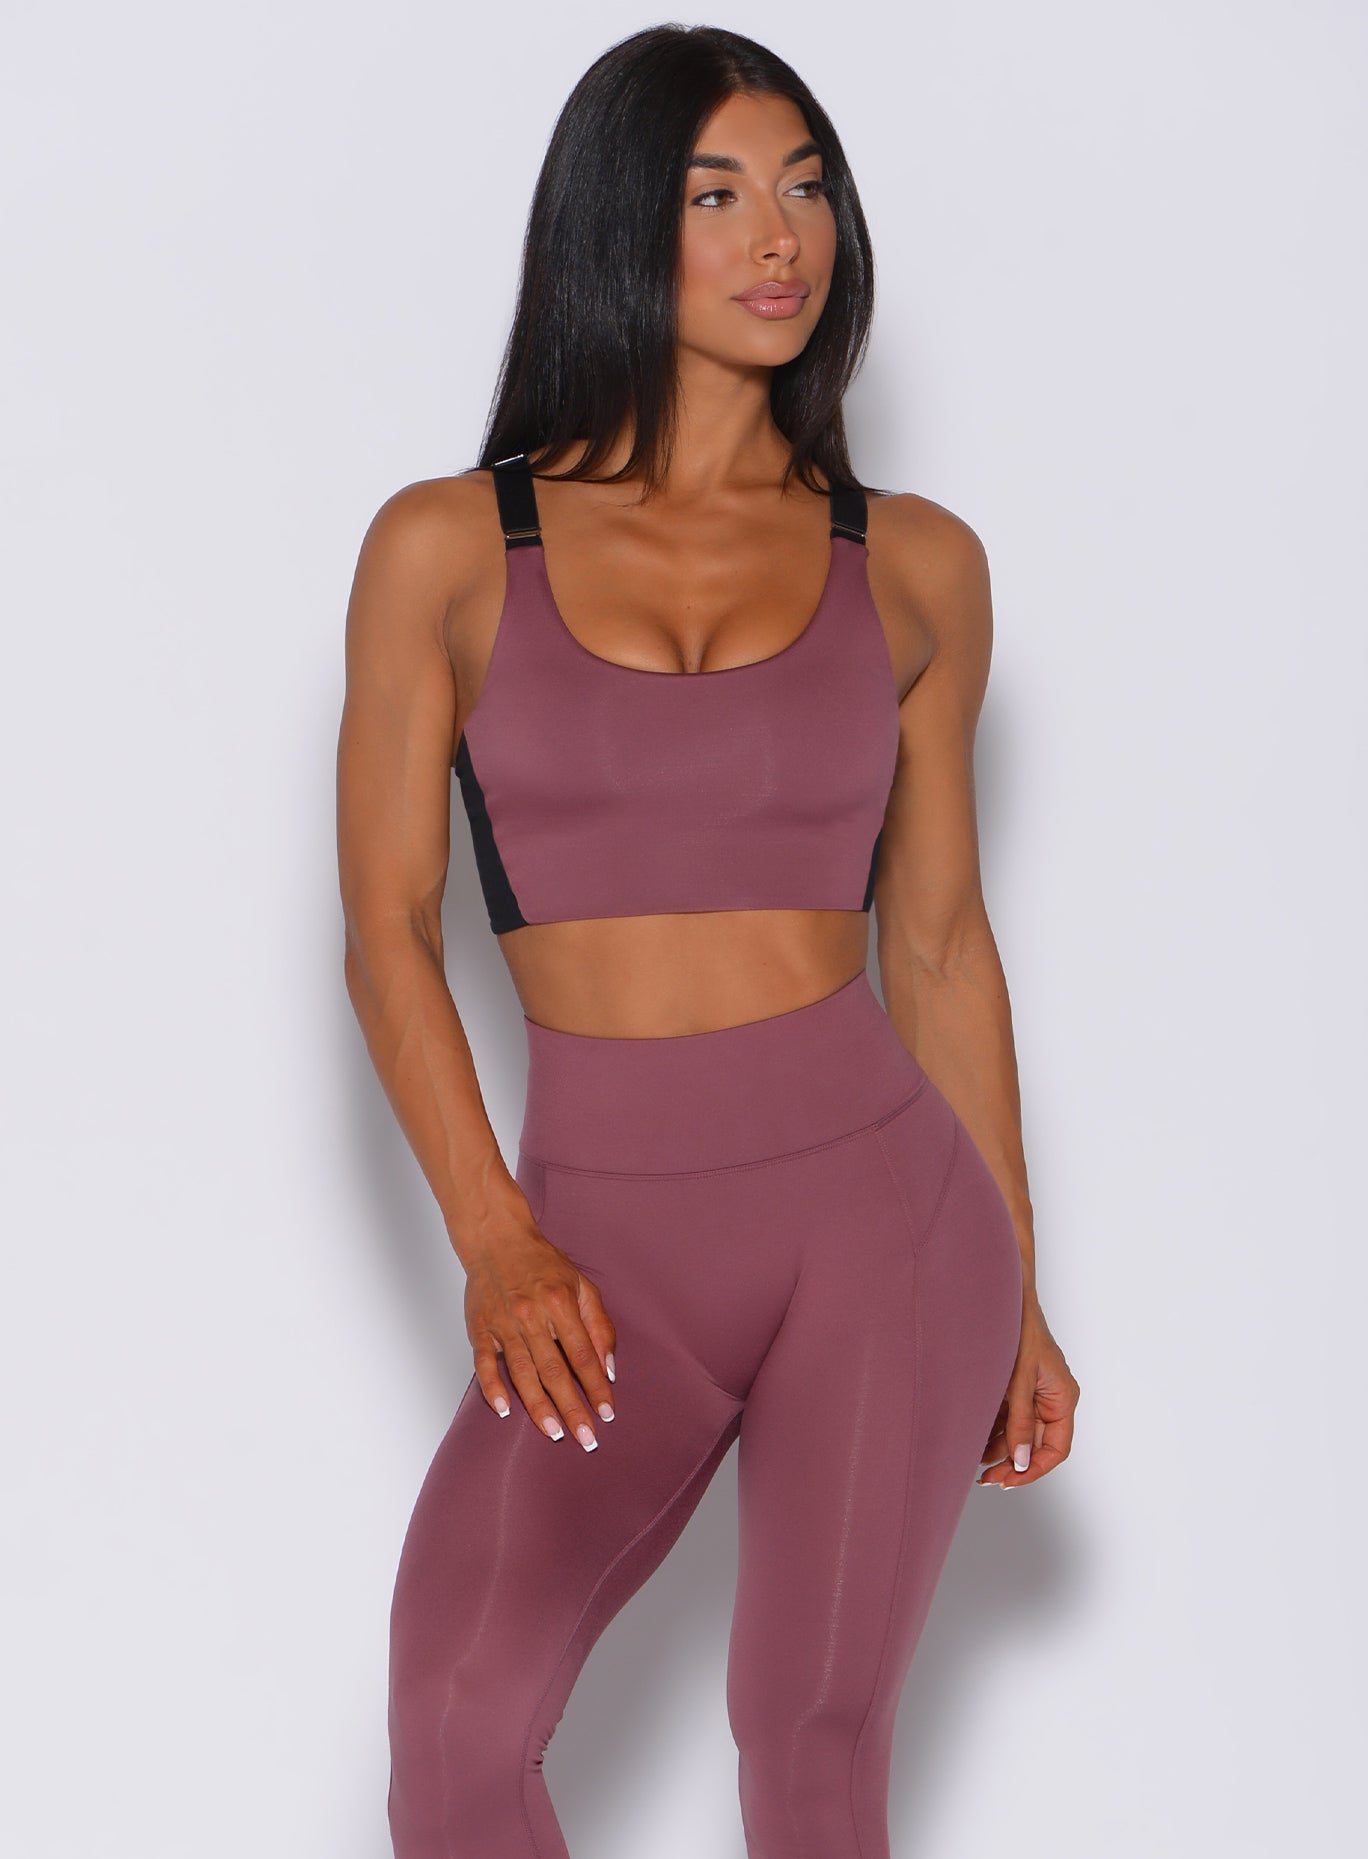 Front profile view of a model wearing our banded sports bra in merlot color and a matching leggings